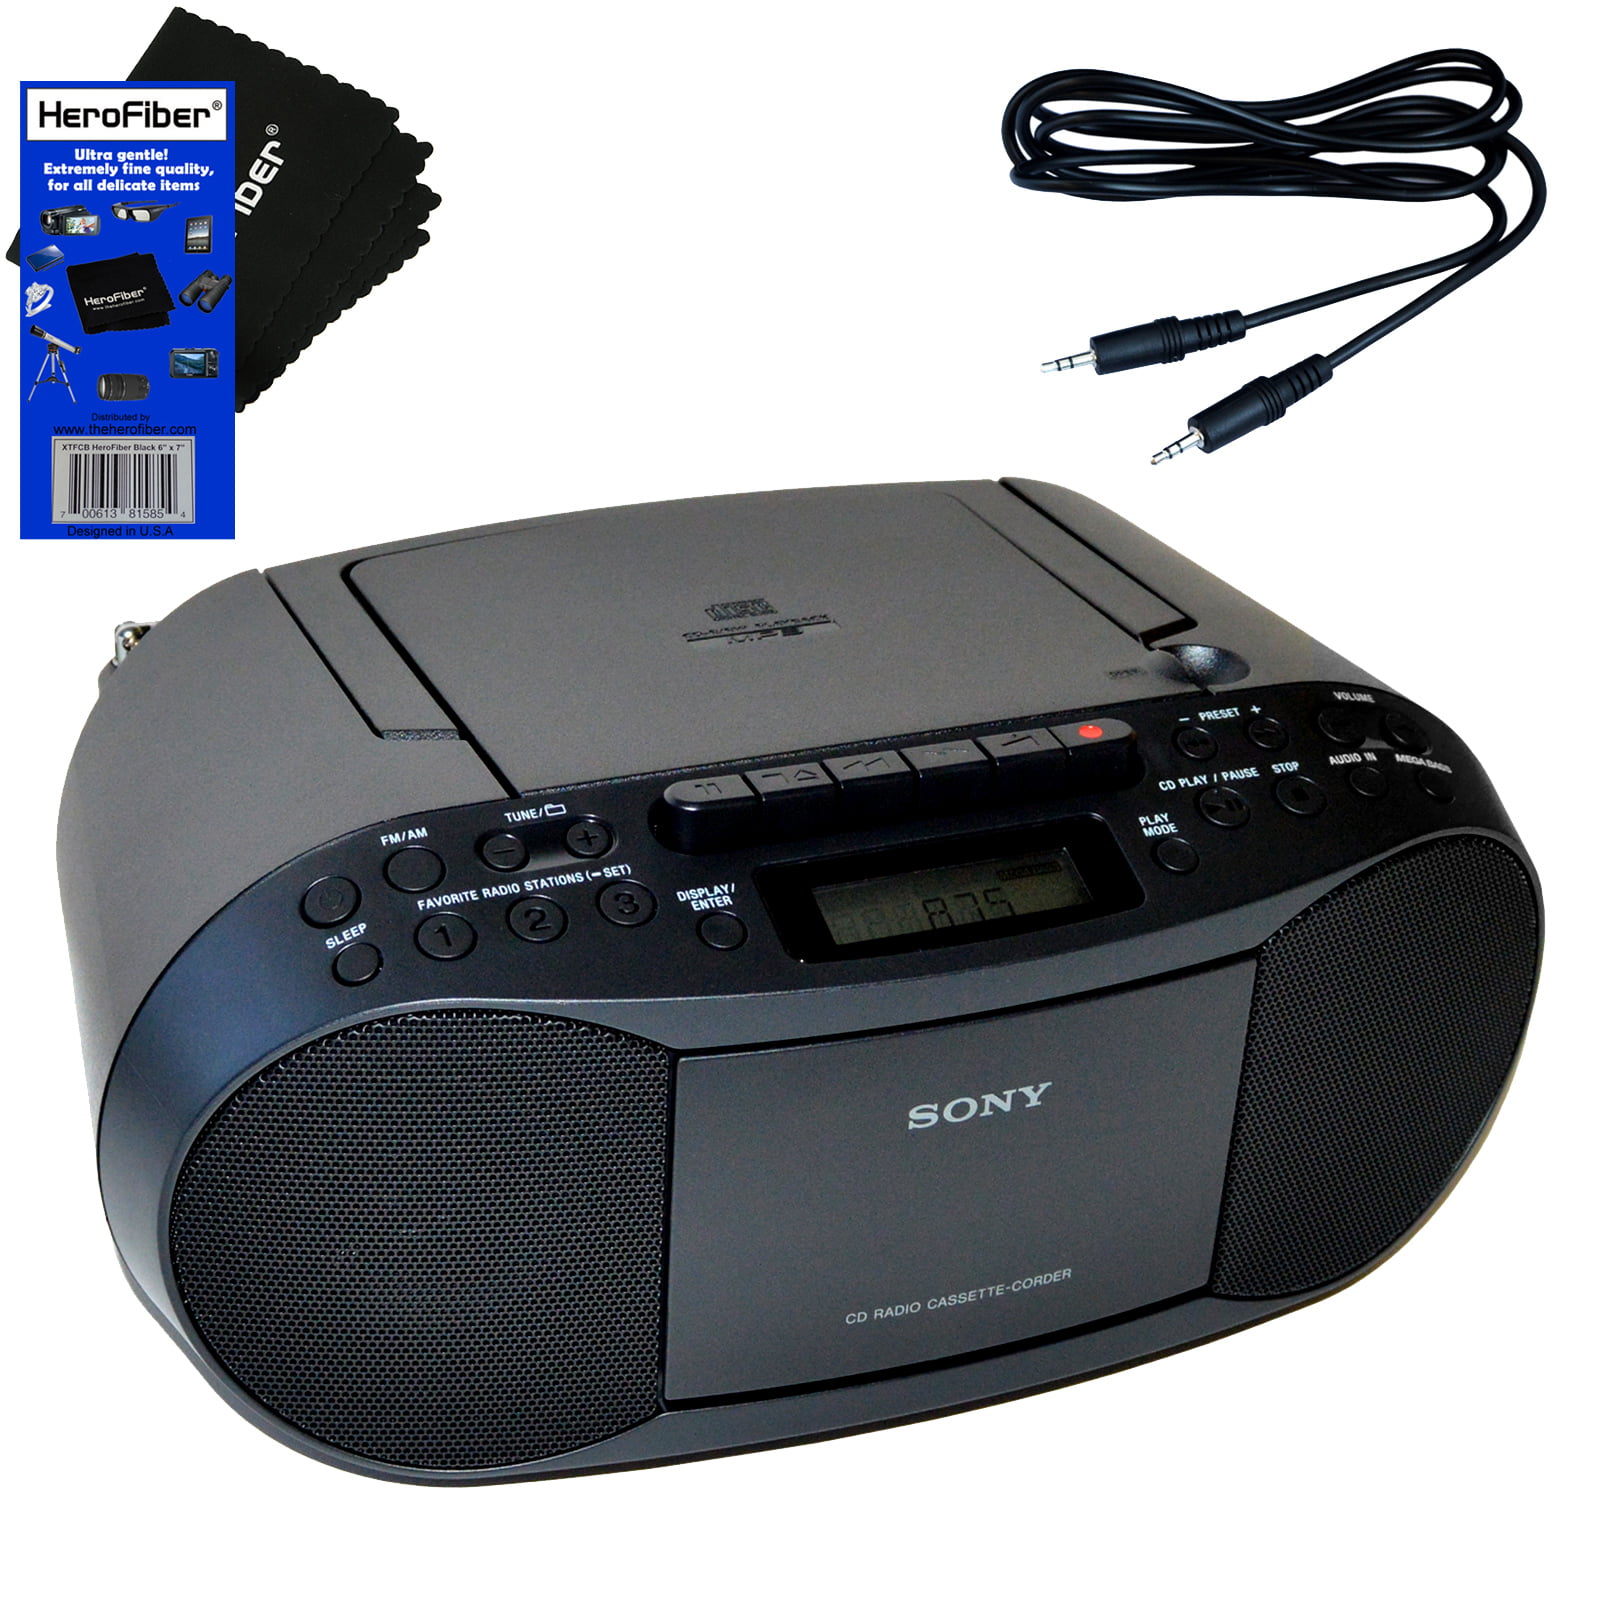 Sony Portable CD Player Boombox with AM/FM Radio &amp; Cassette Tape Player + Auxiliary Cable for Smartphones, MP3 Players &amp; HeroFiber Ultra Gentle Cleaning Cloth